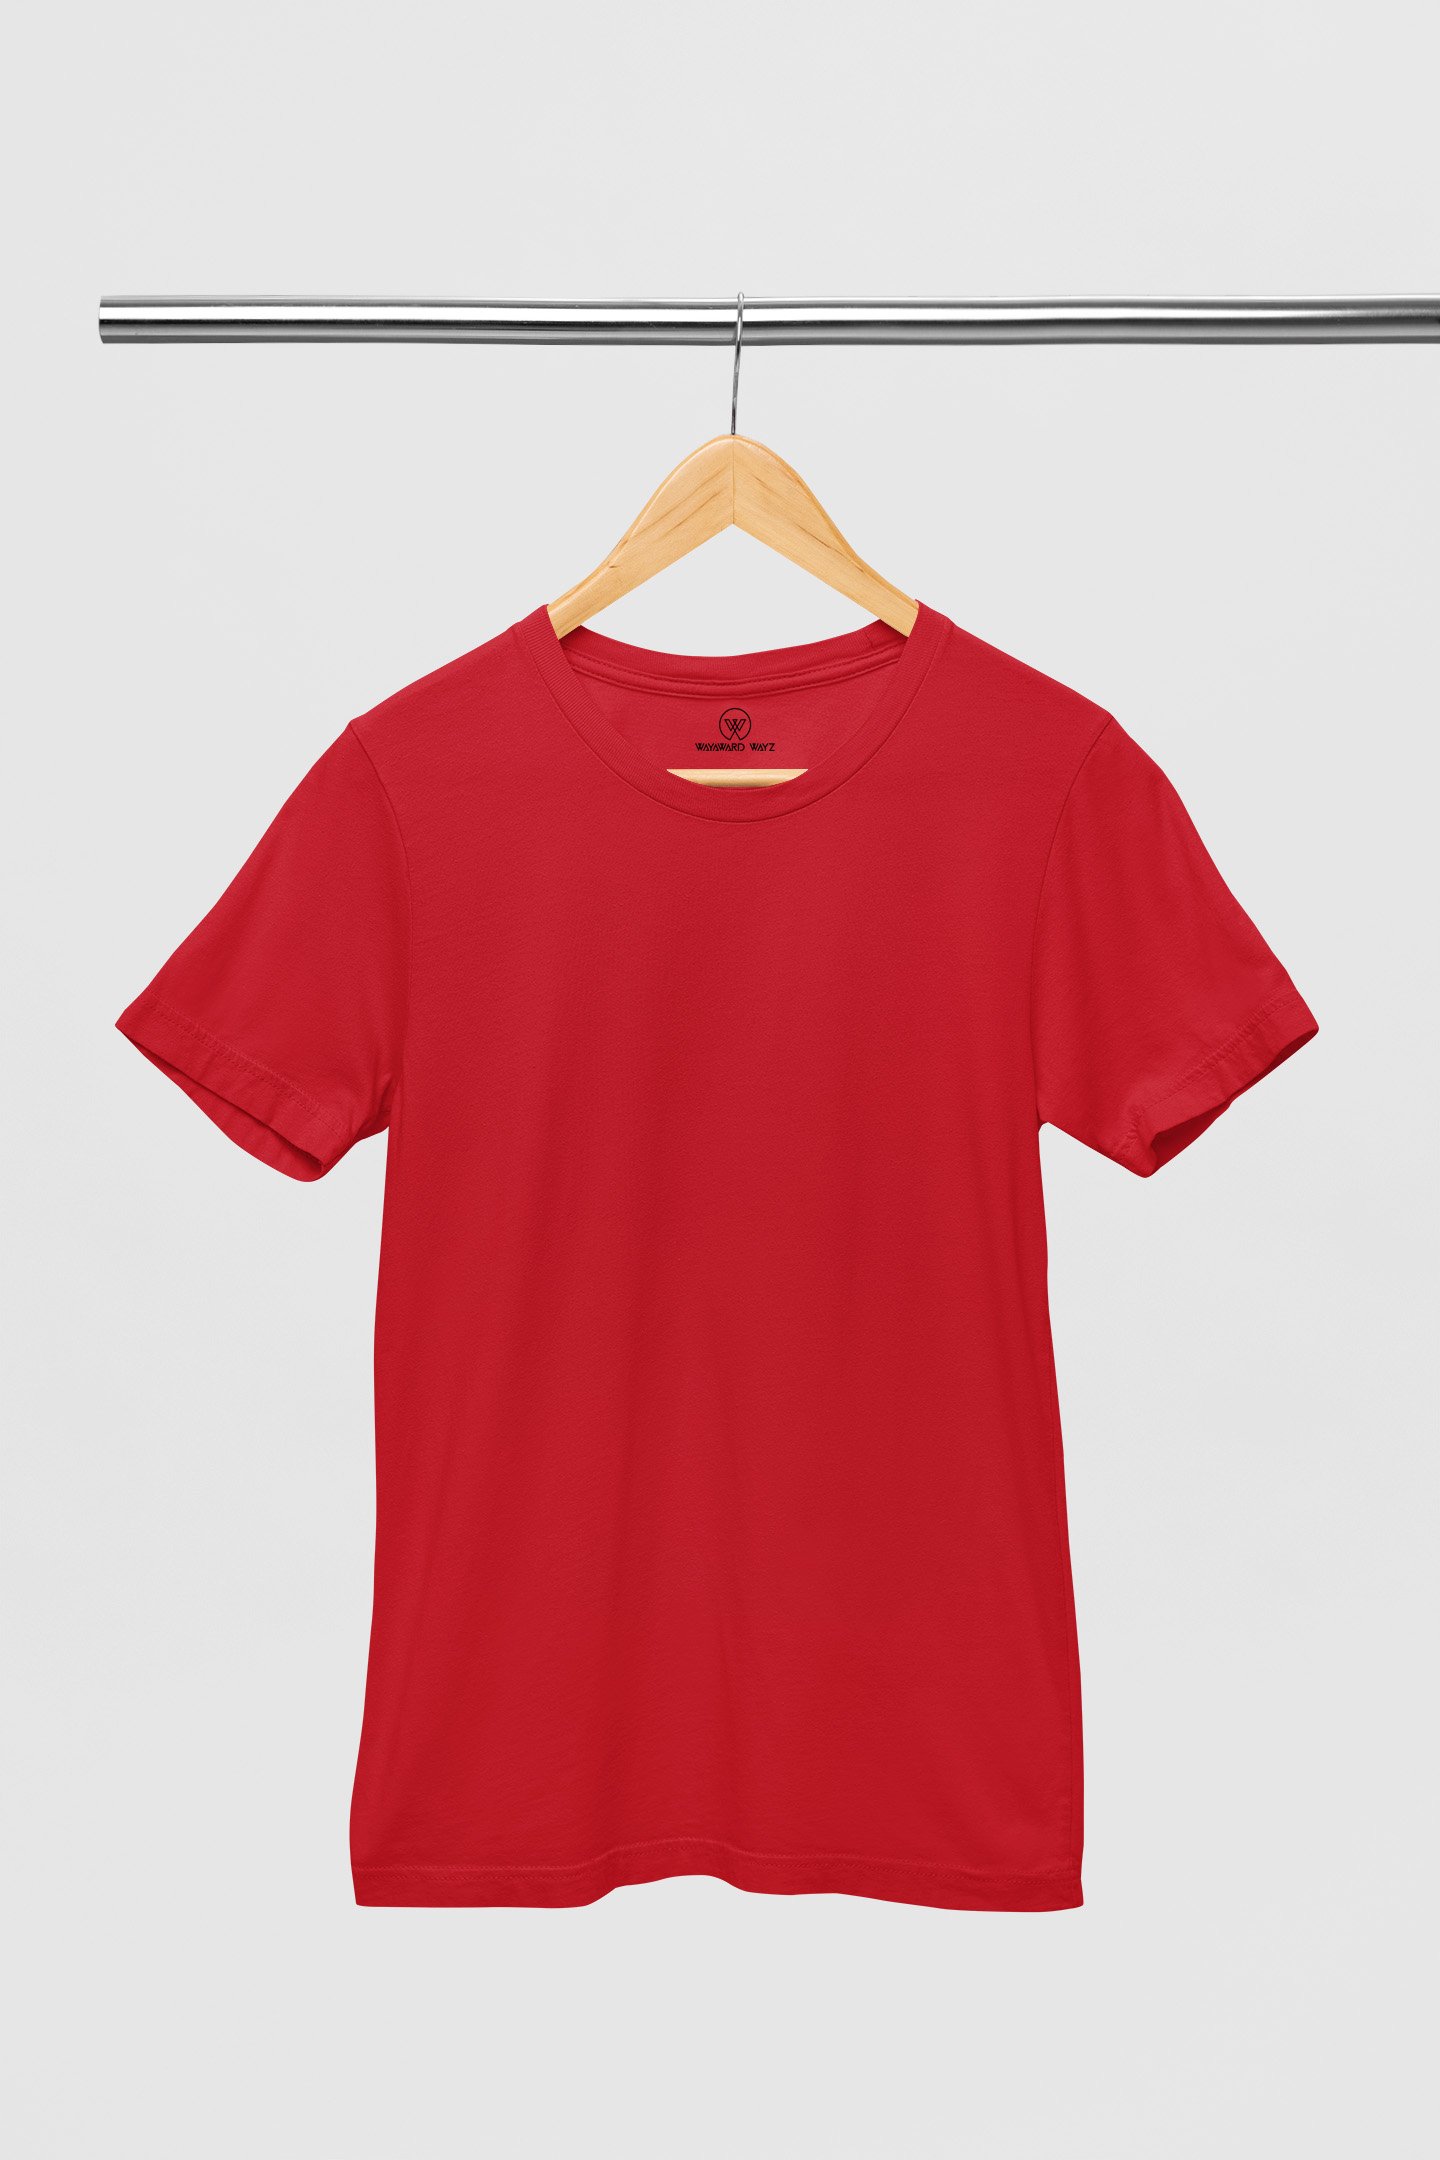 Red Solid T-Shirt by Wayward Wayz Front